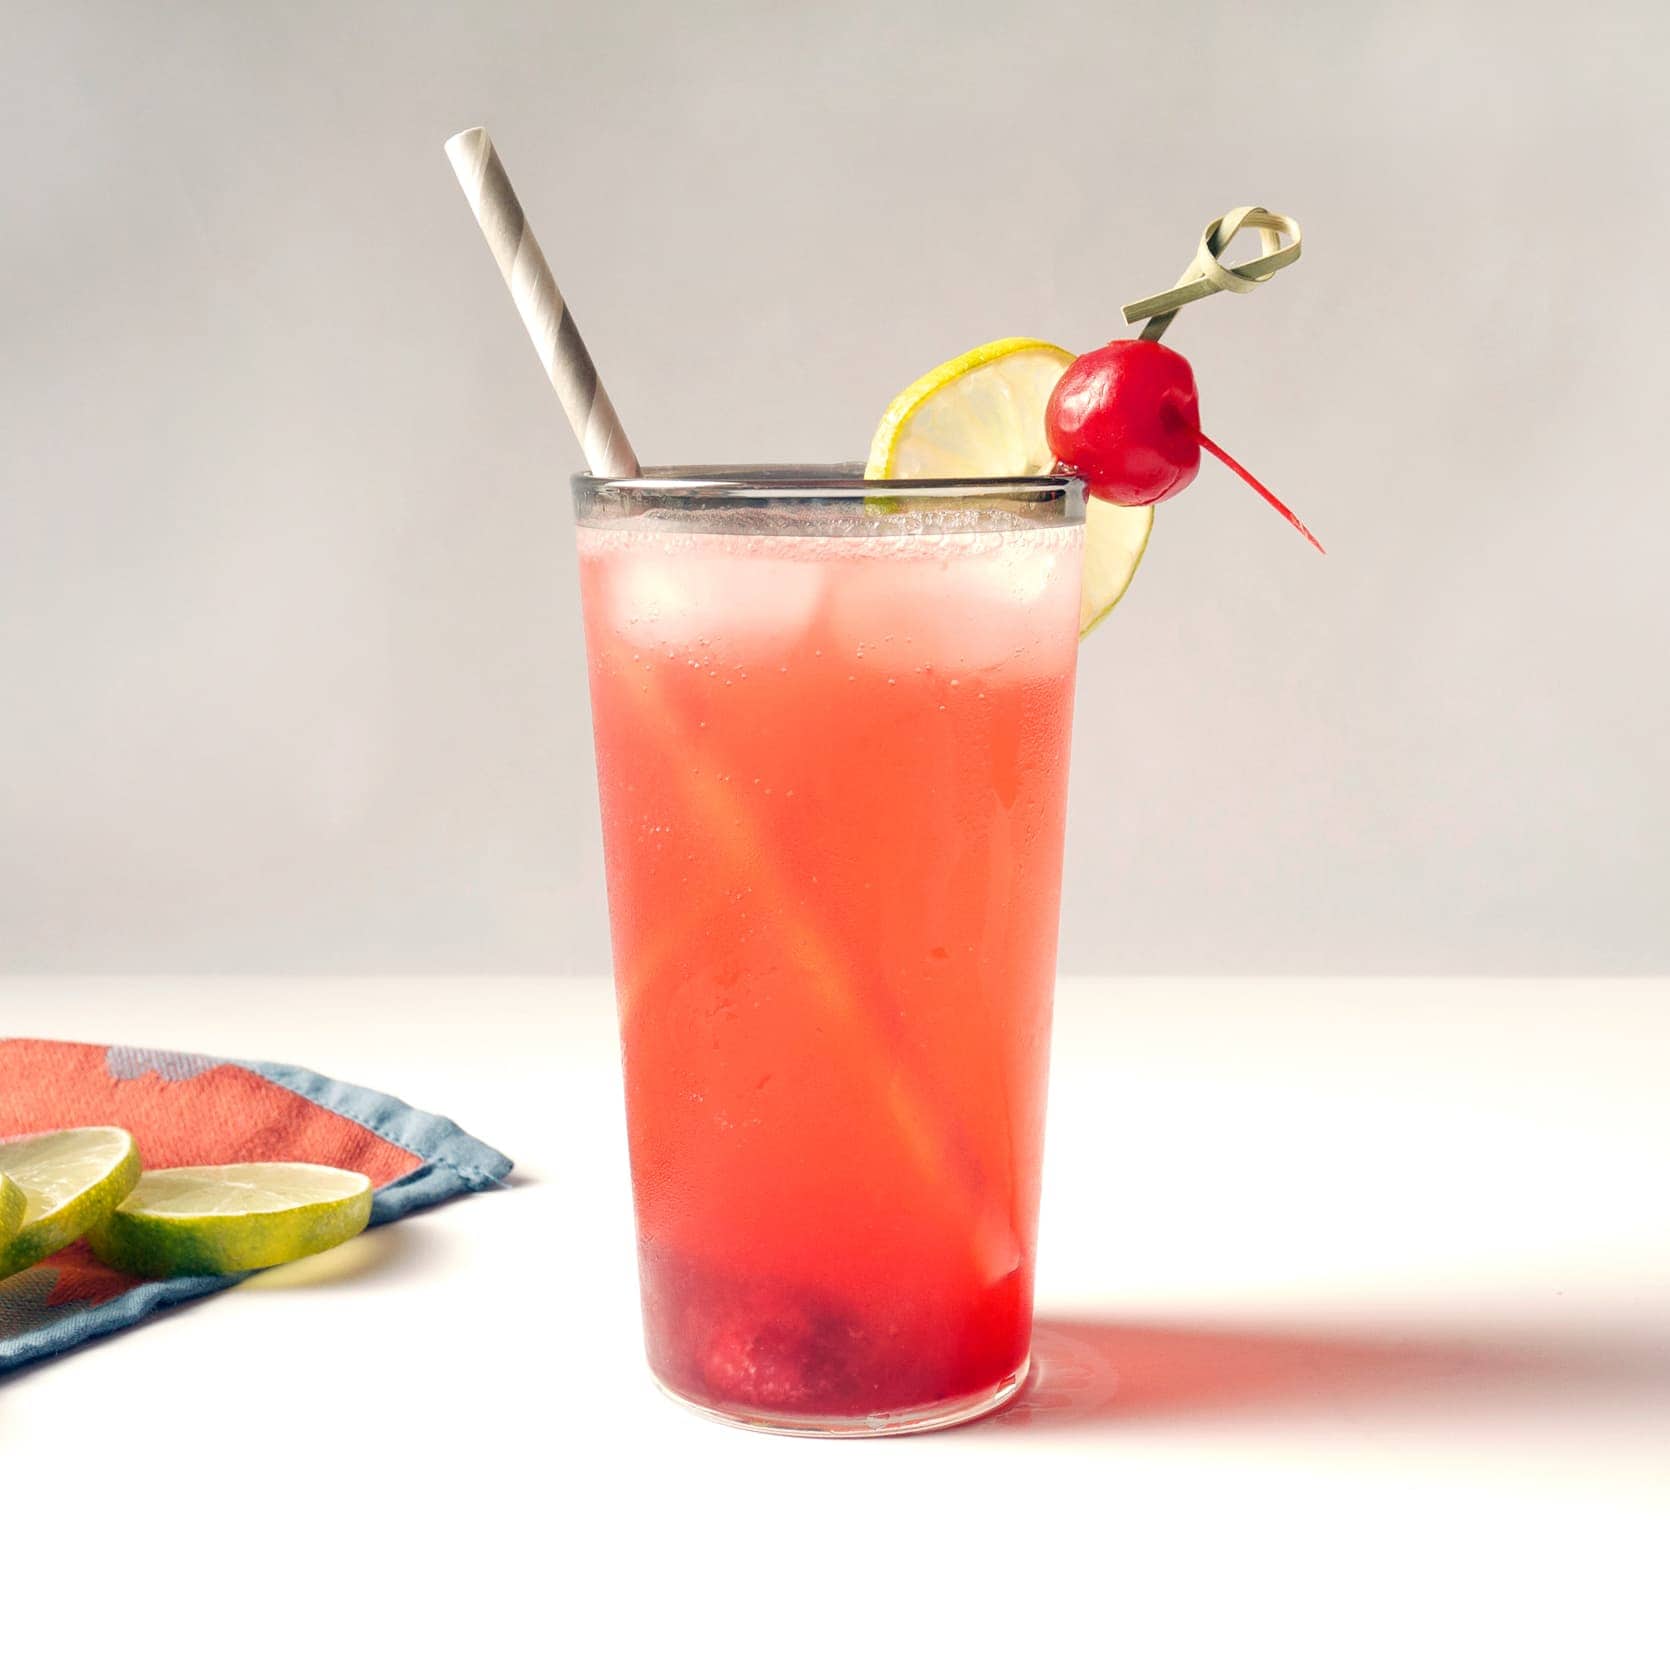 The Rickey Sling Cocktail